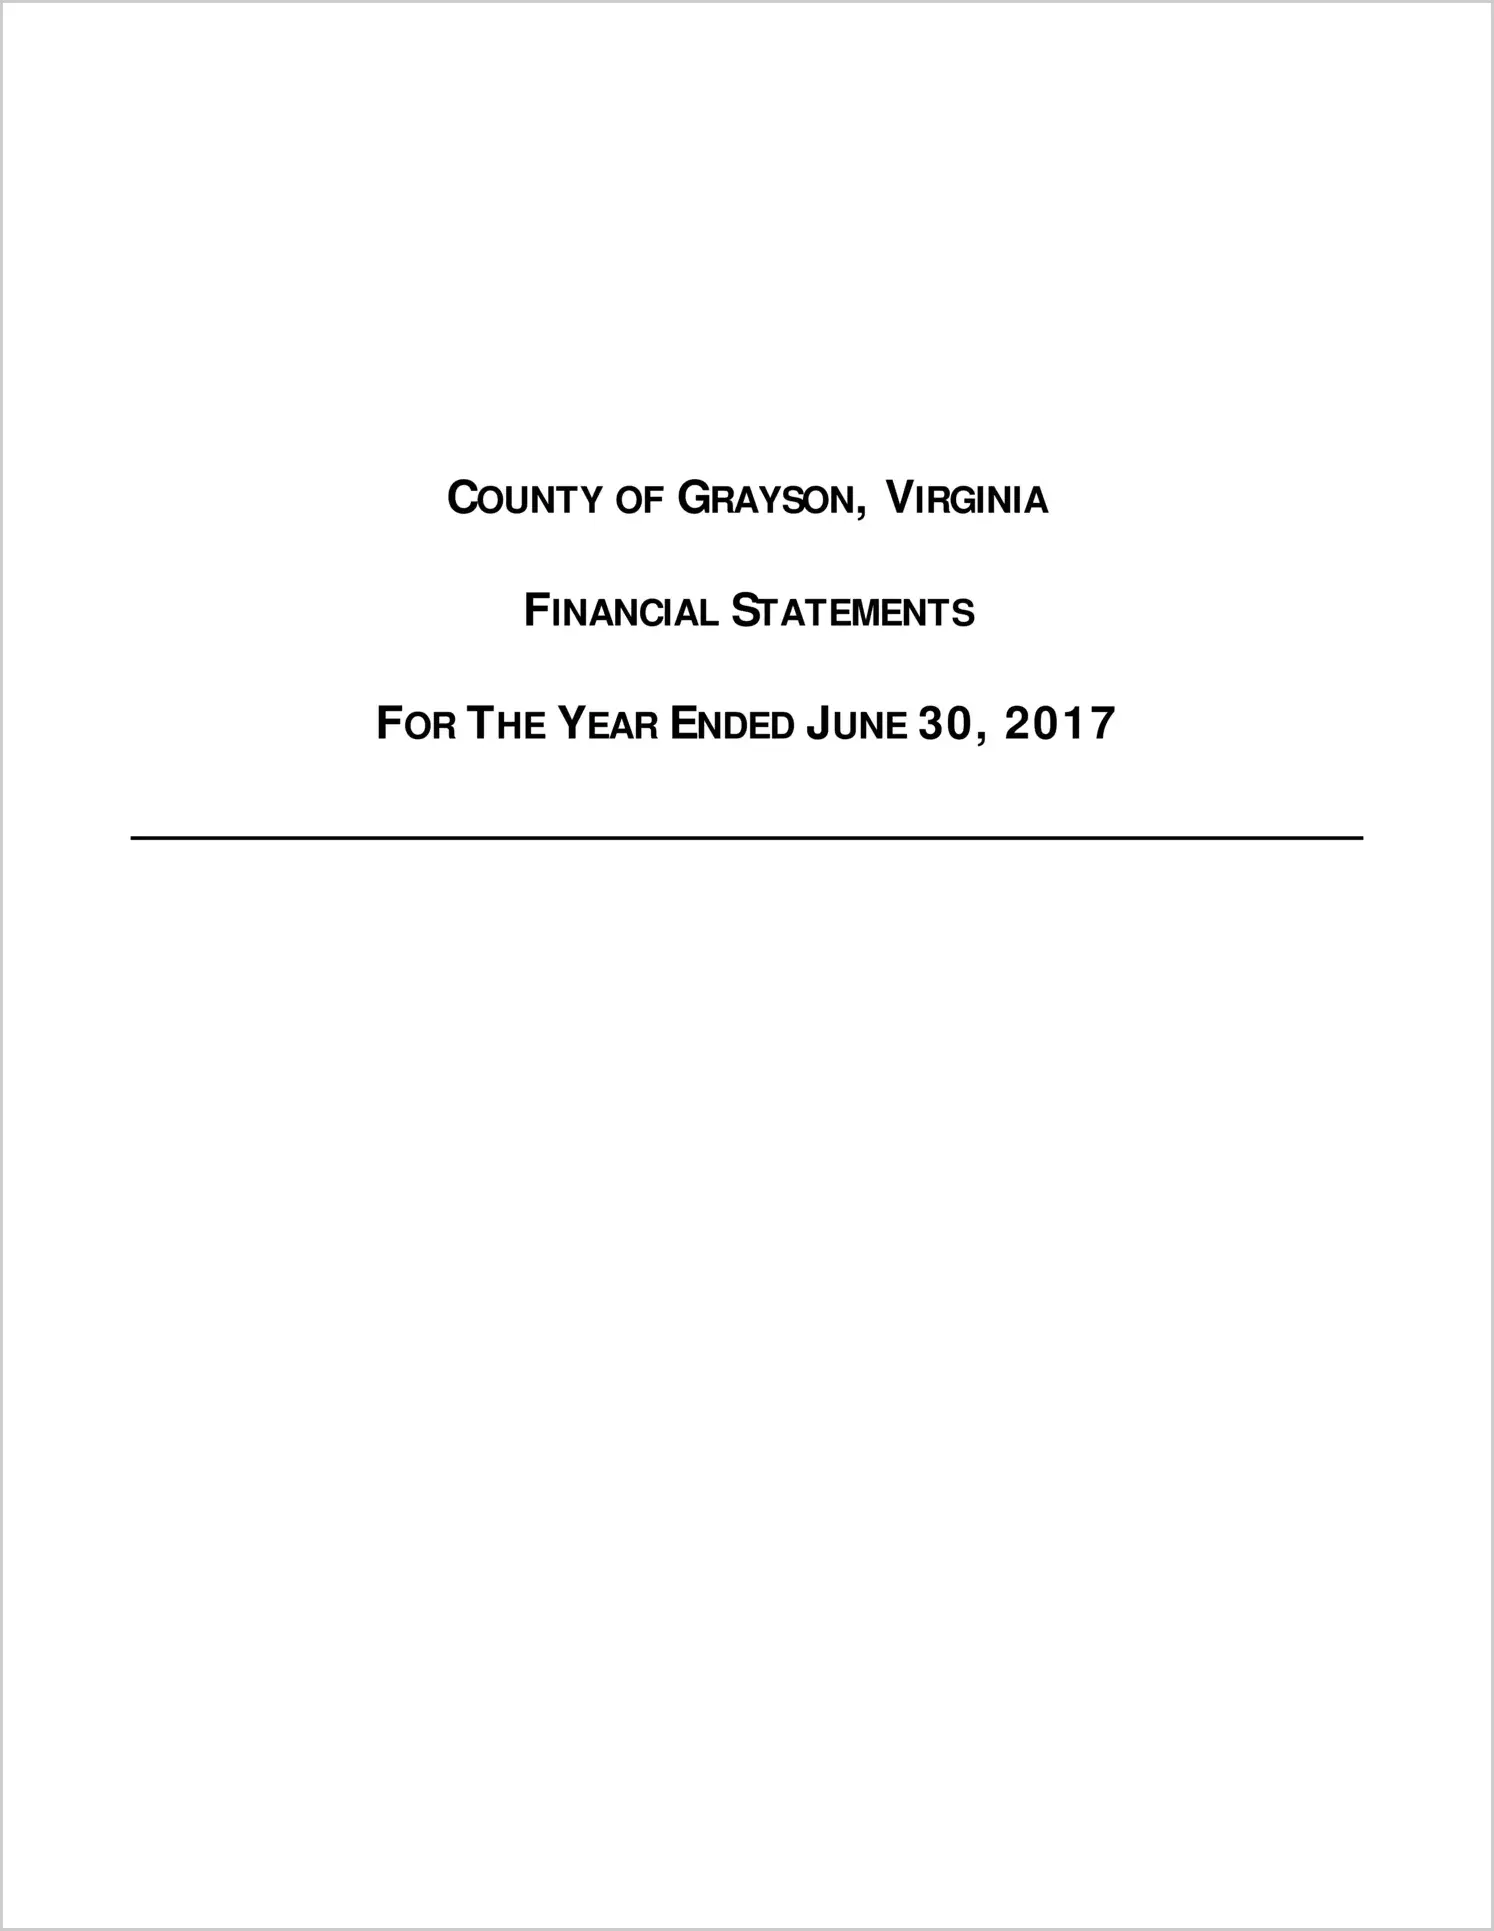 2017 Annual Financial Report for County of Grayson